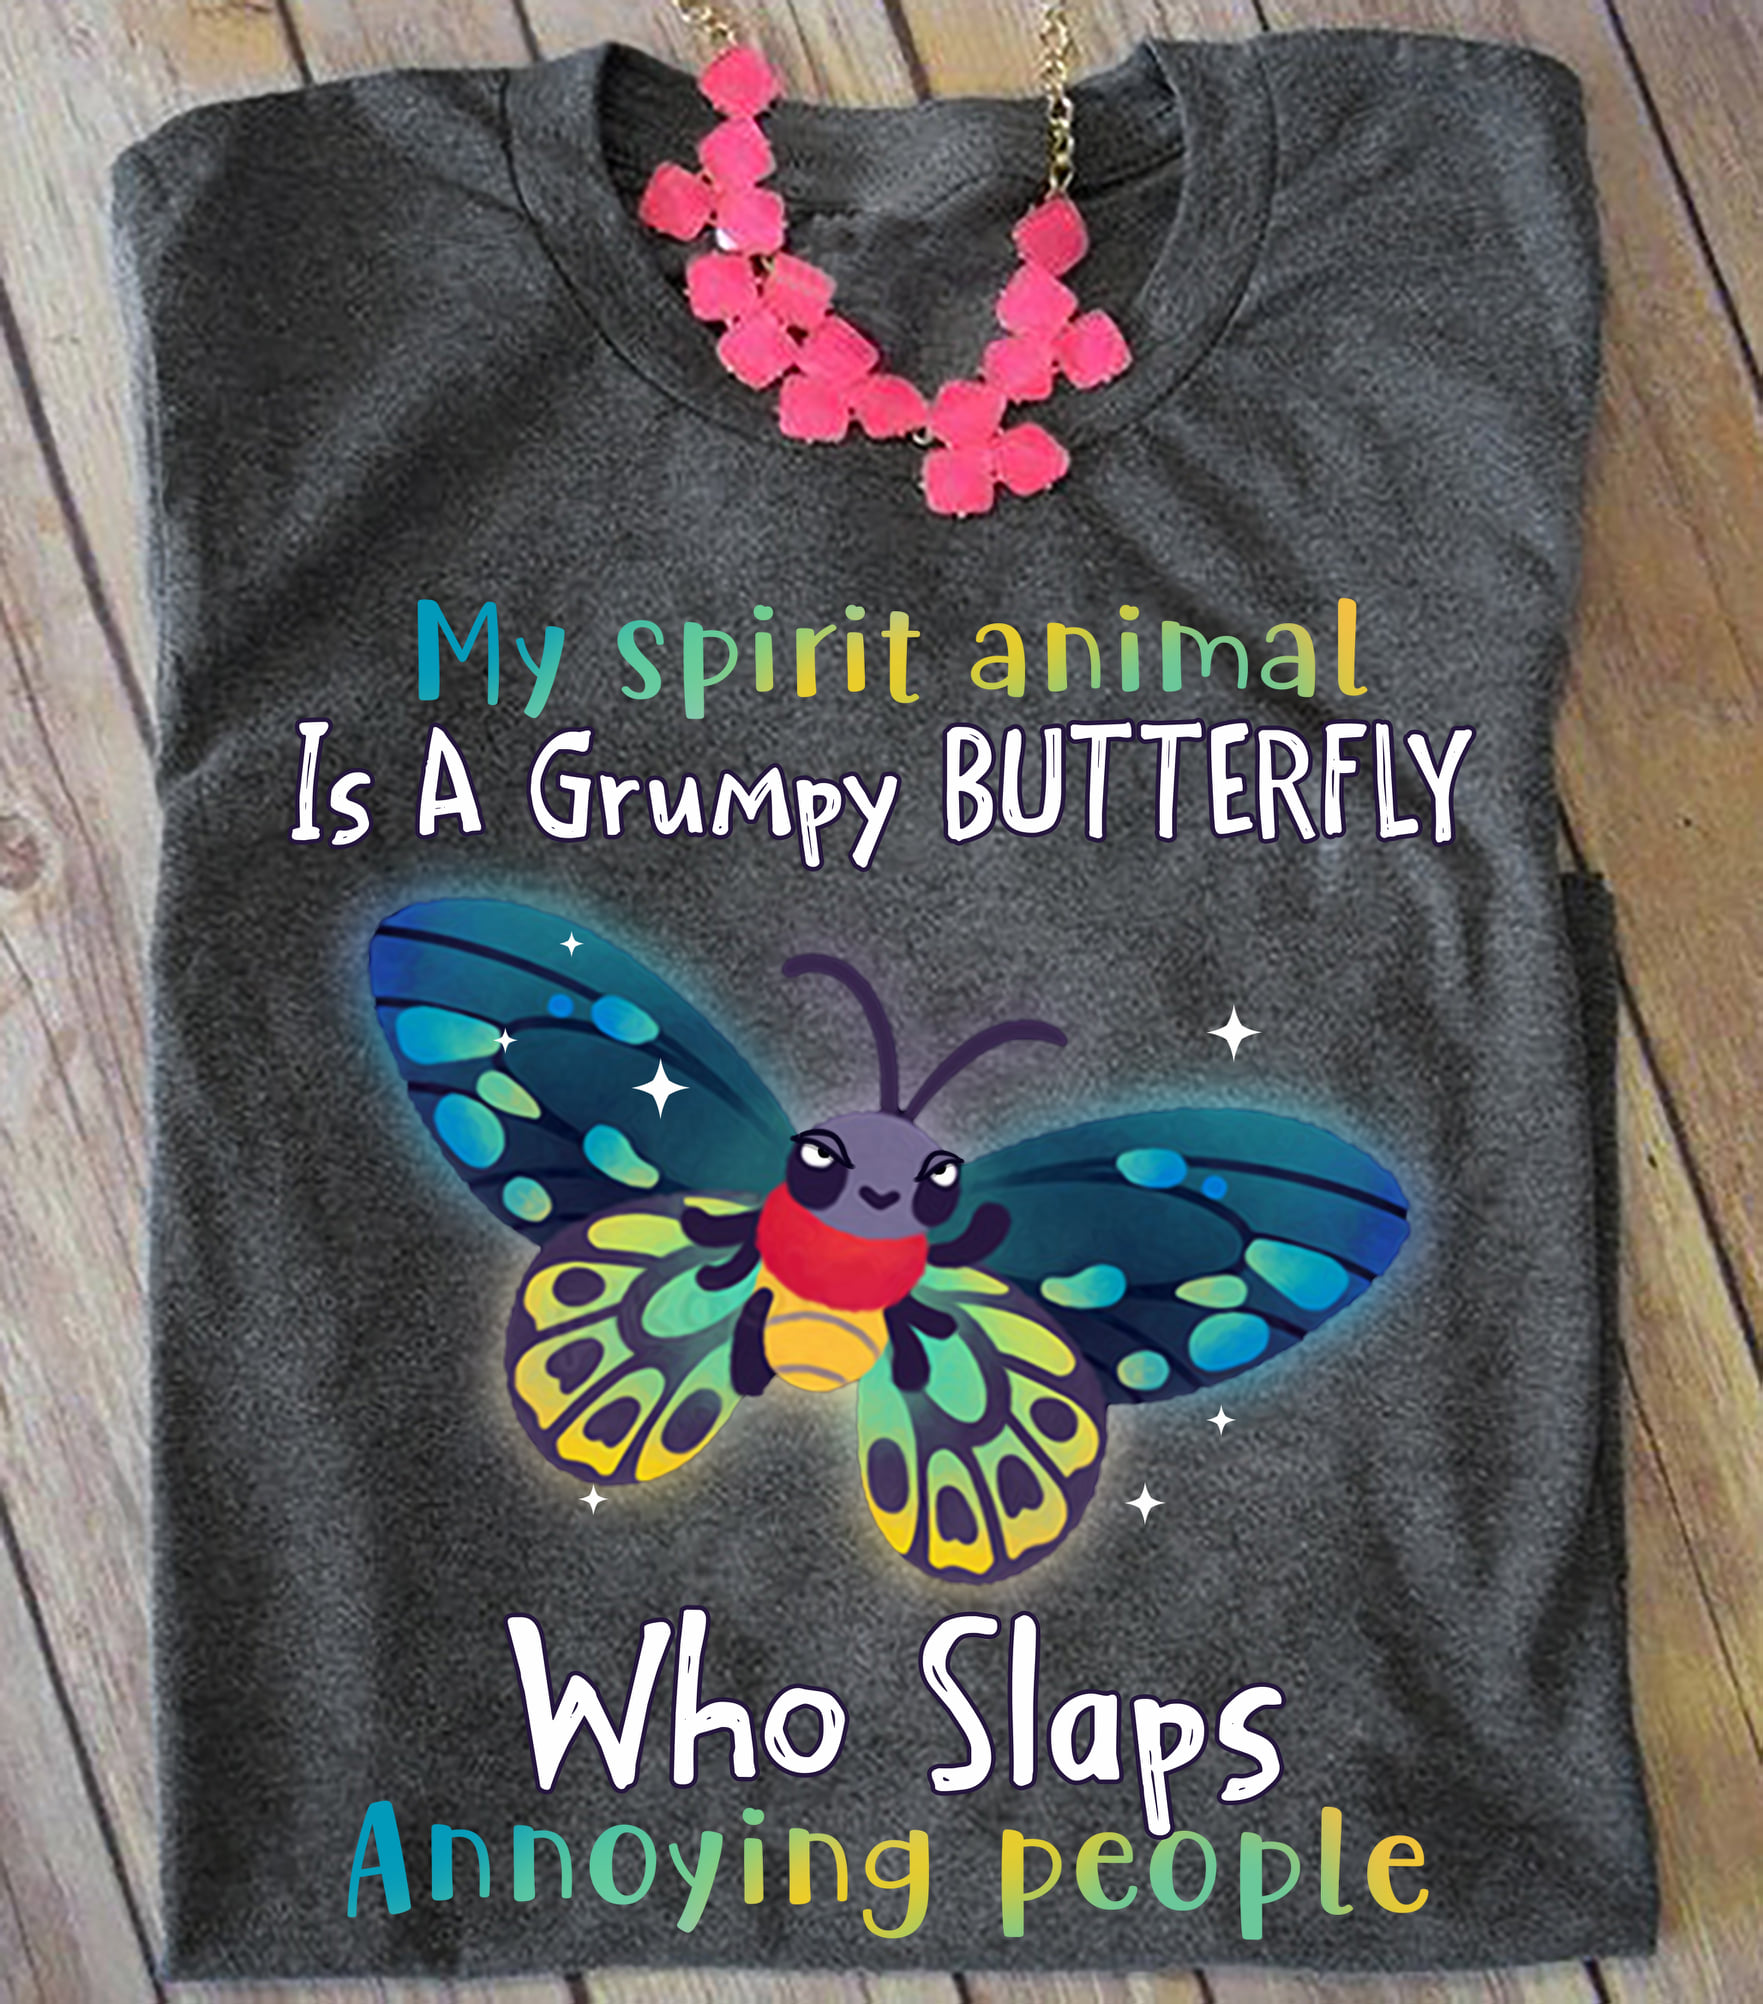 My spirit animal is a grumpy butterfly who slaps annoying people